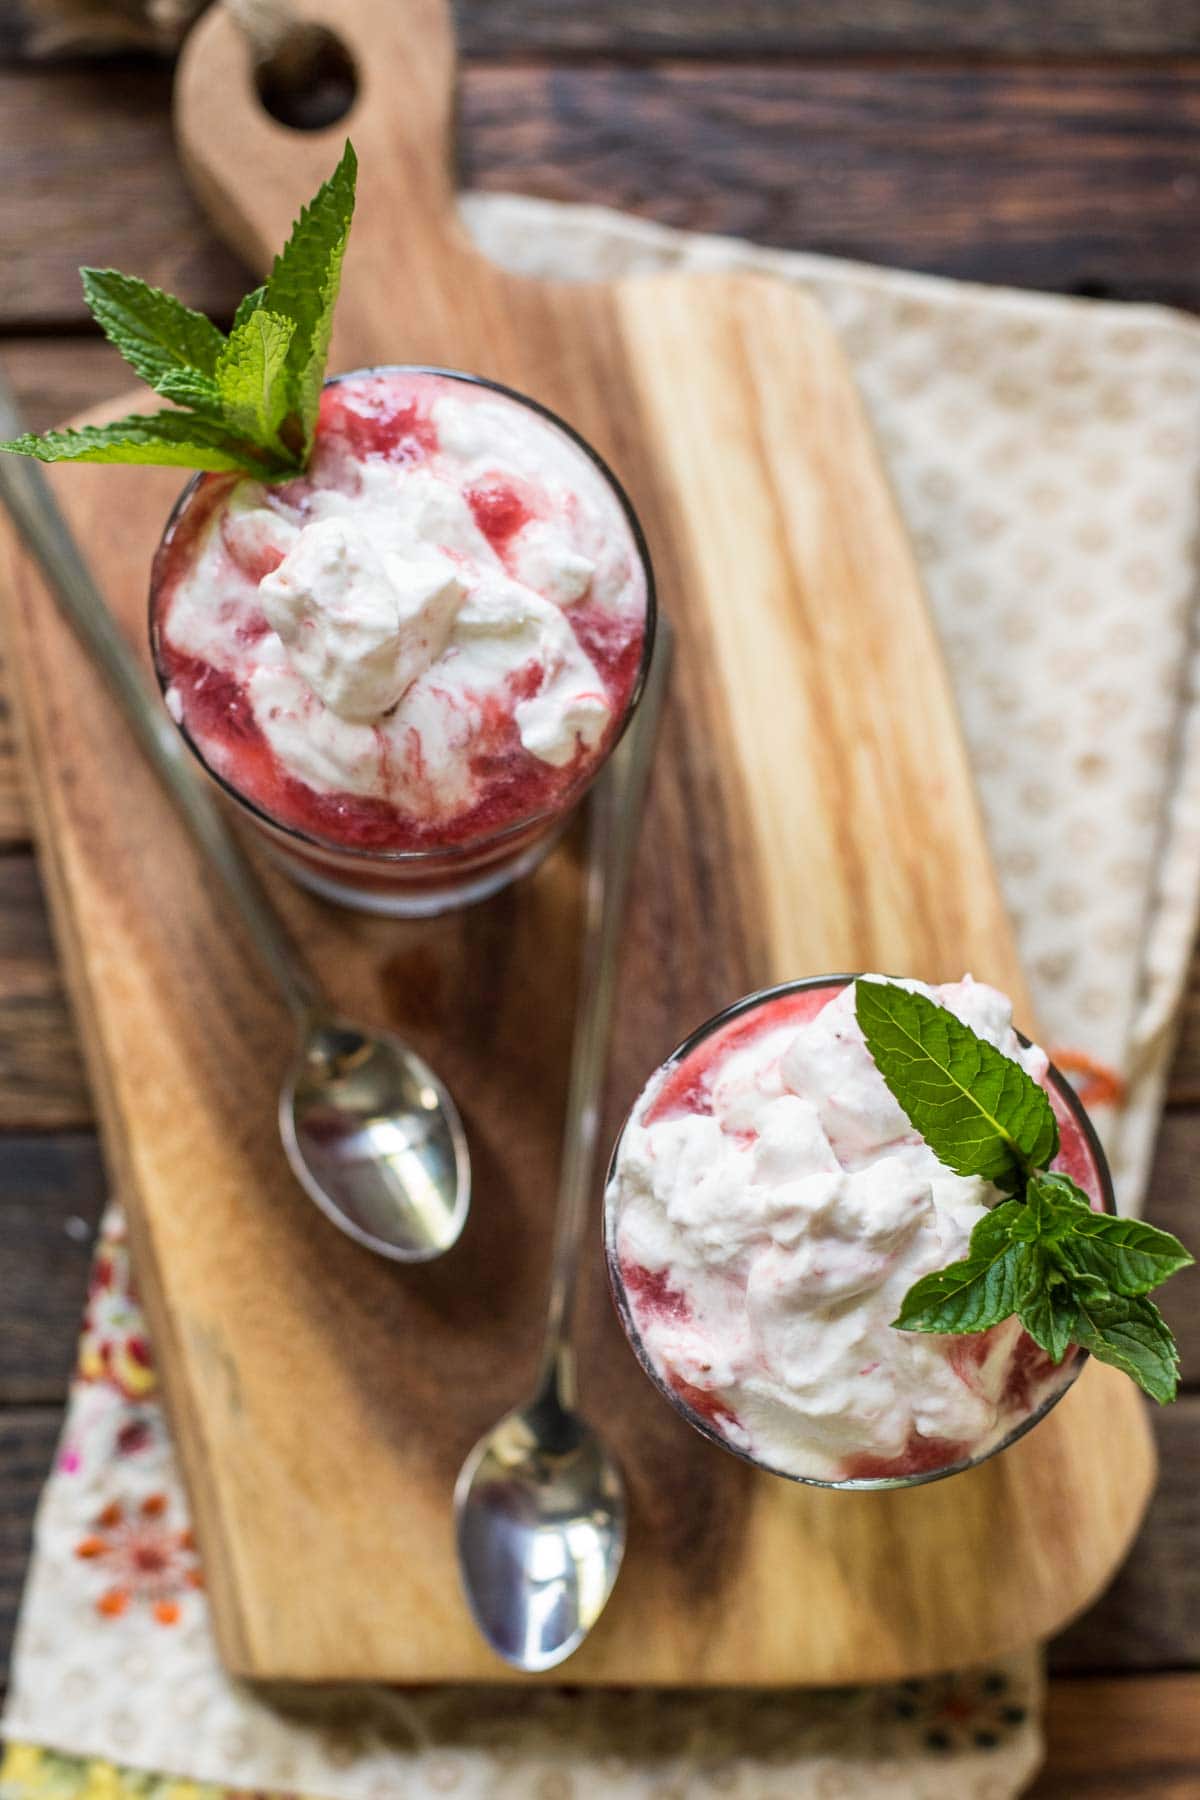 Strawberry Rhubarb Fool is a classic summer dessert that's so easy to make.